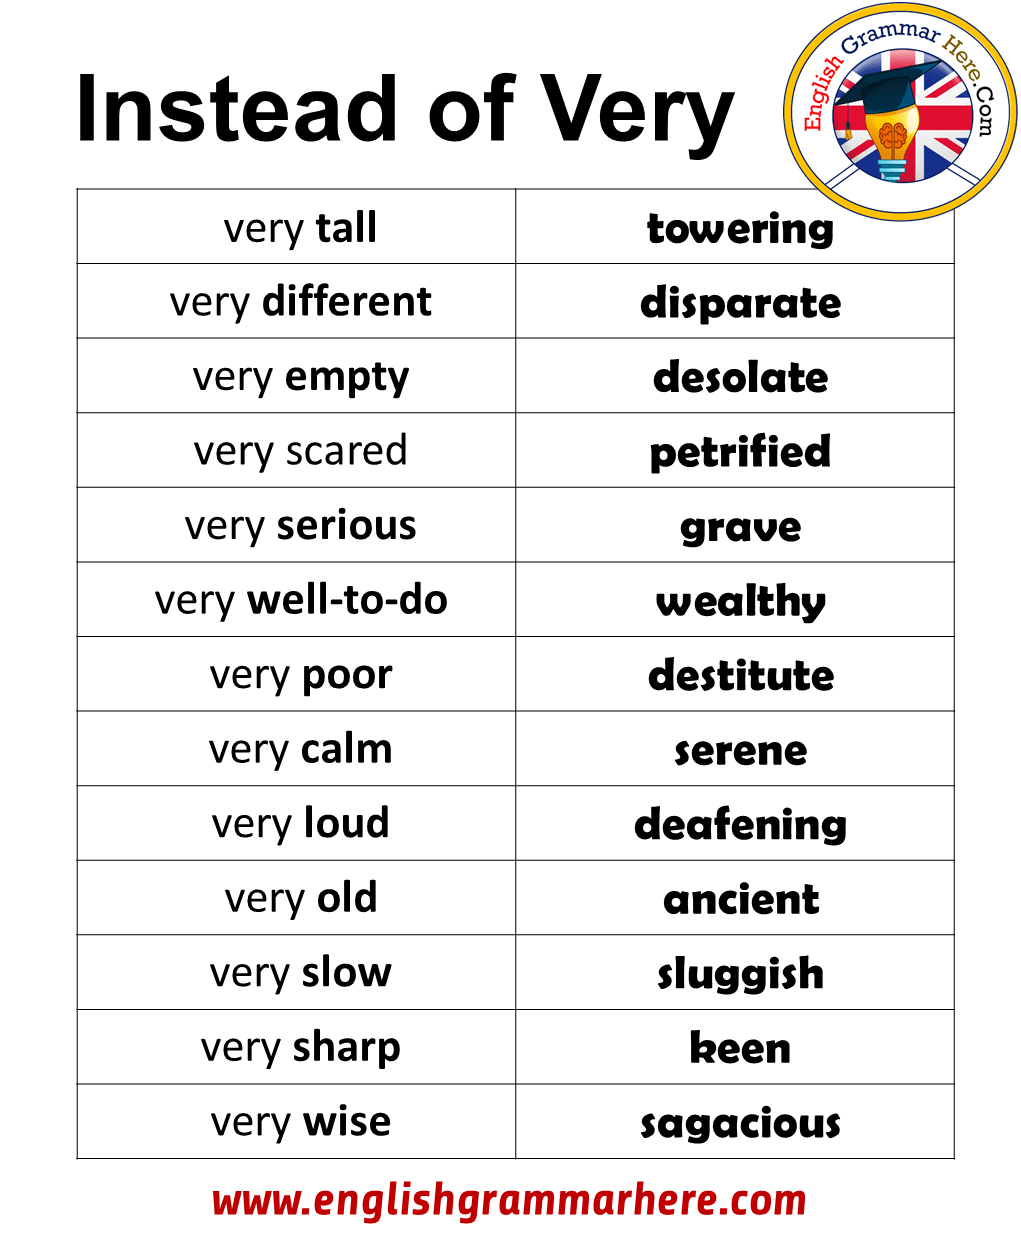 English 98 Words Instead Of Very, use These Words Instead of Very